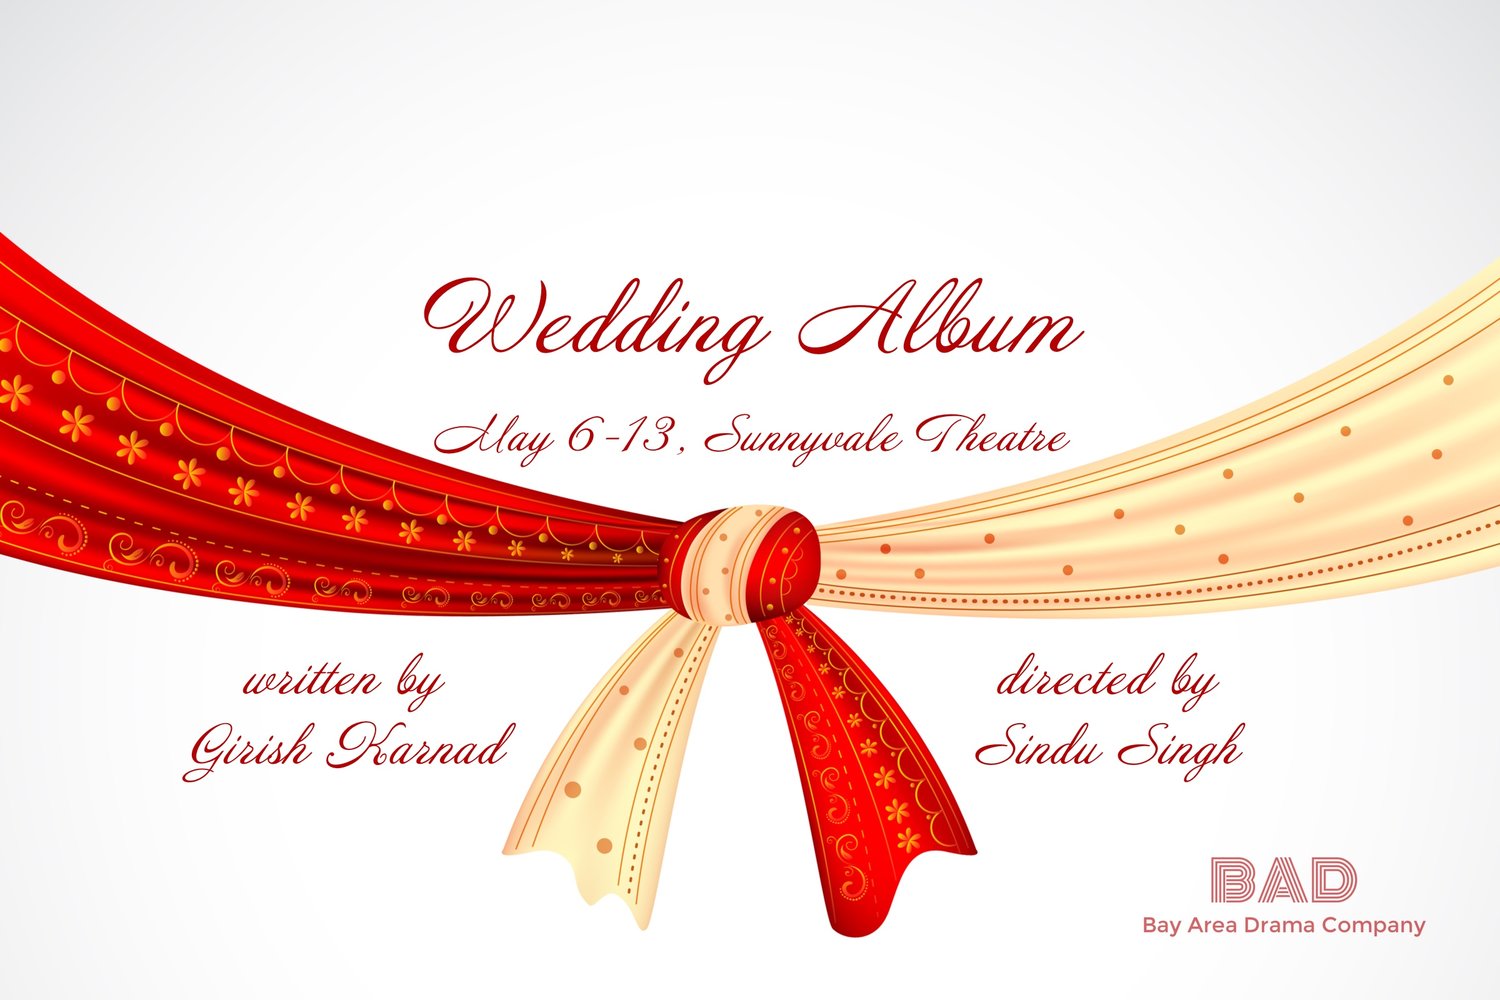 Auditions for WEDDING ALBUM are on Feb 12th — Bay Area Drama Company